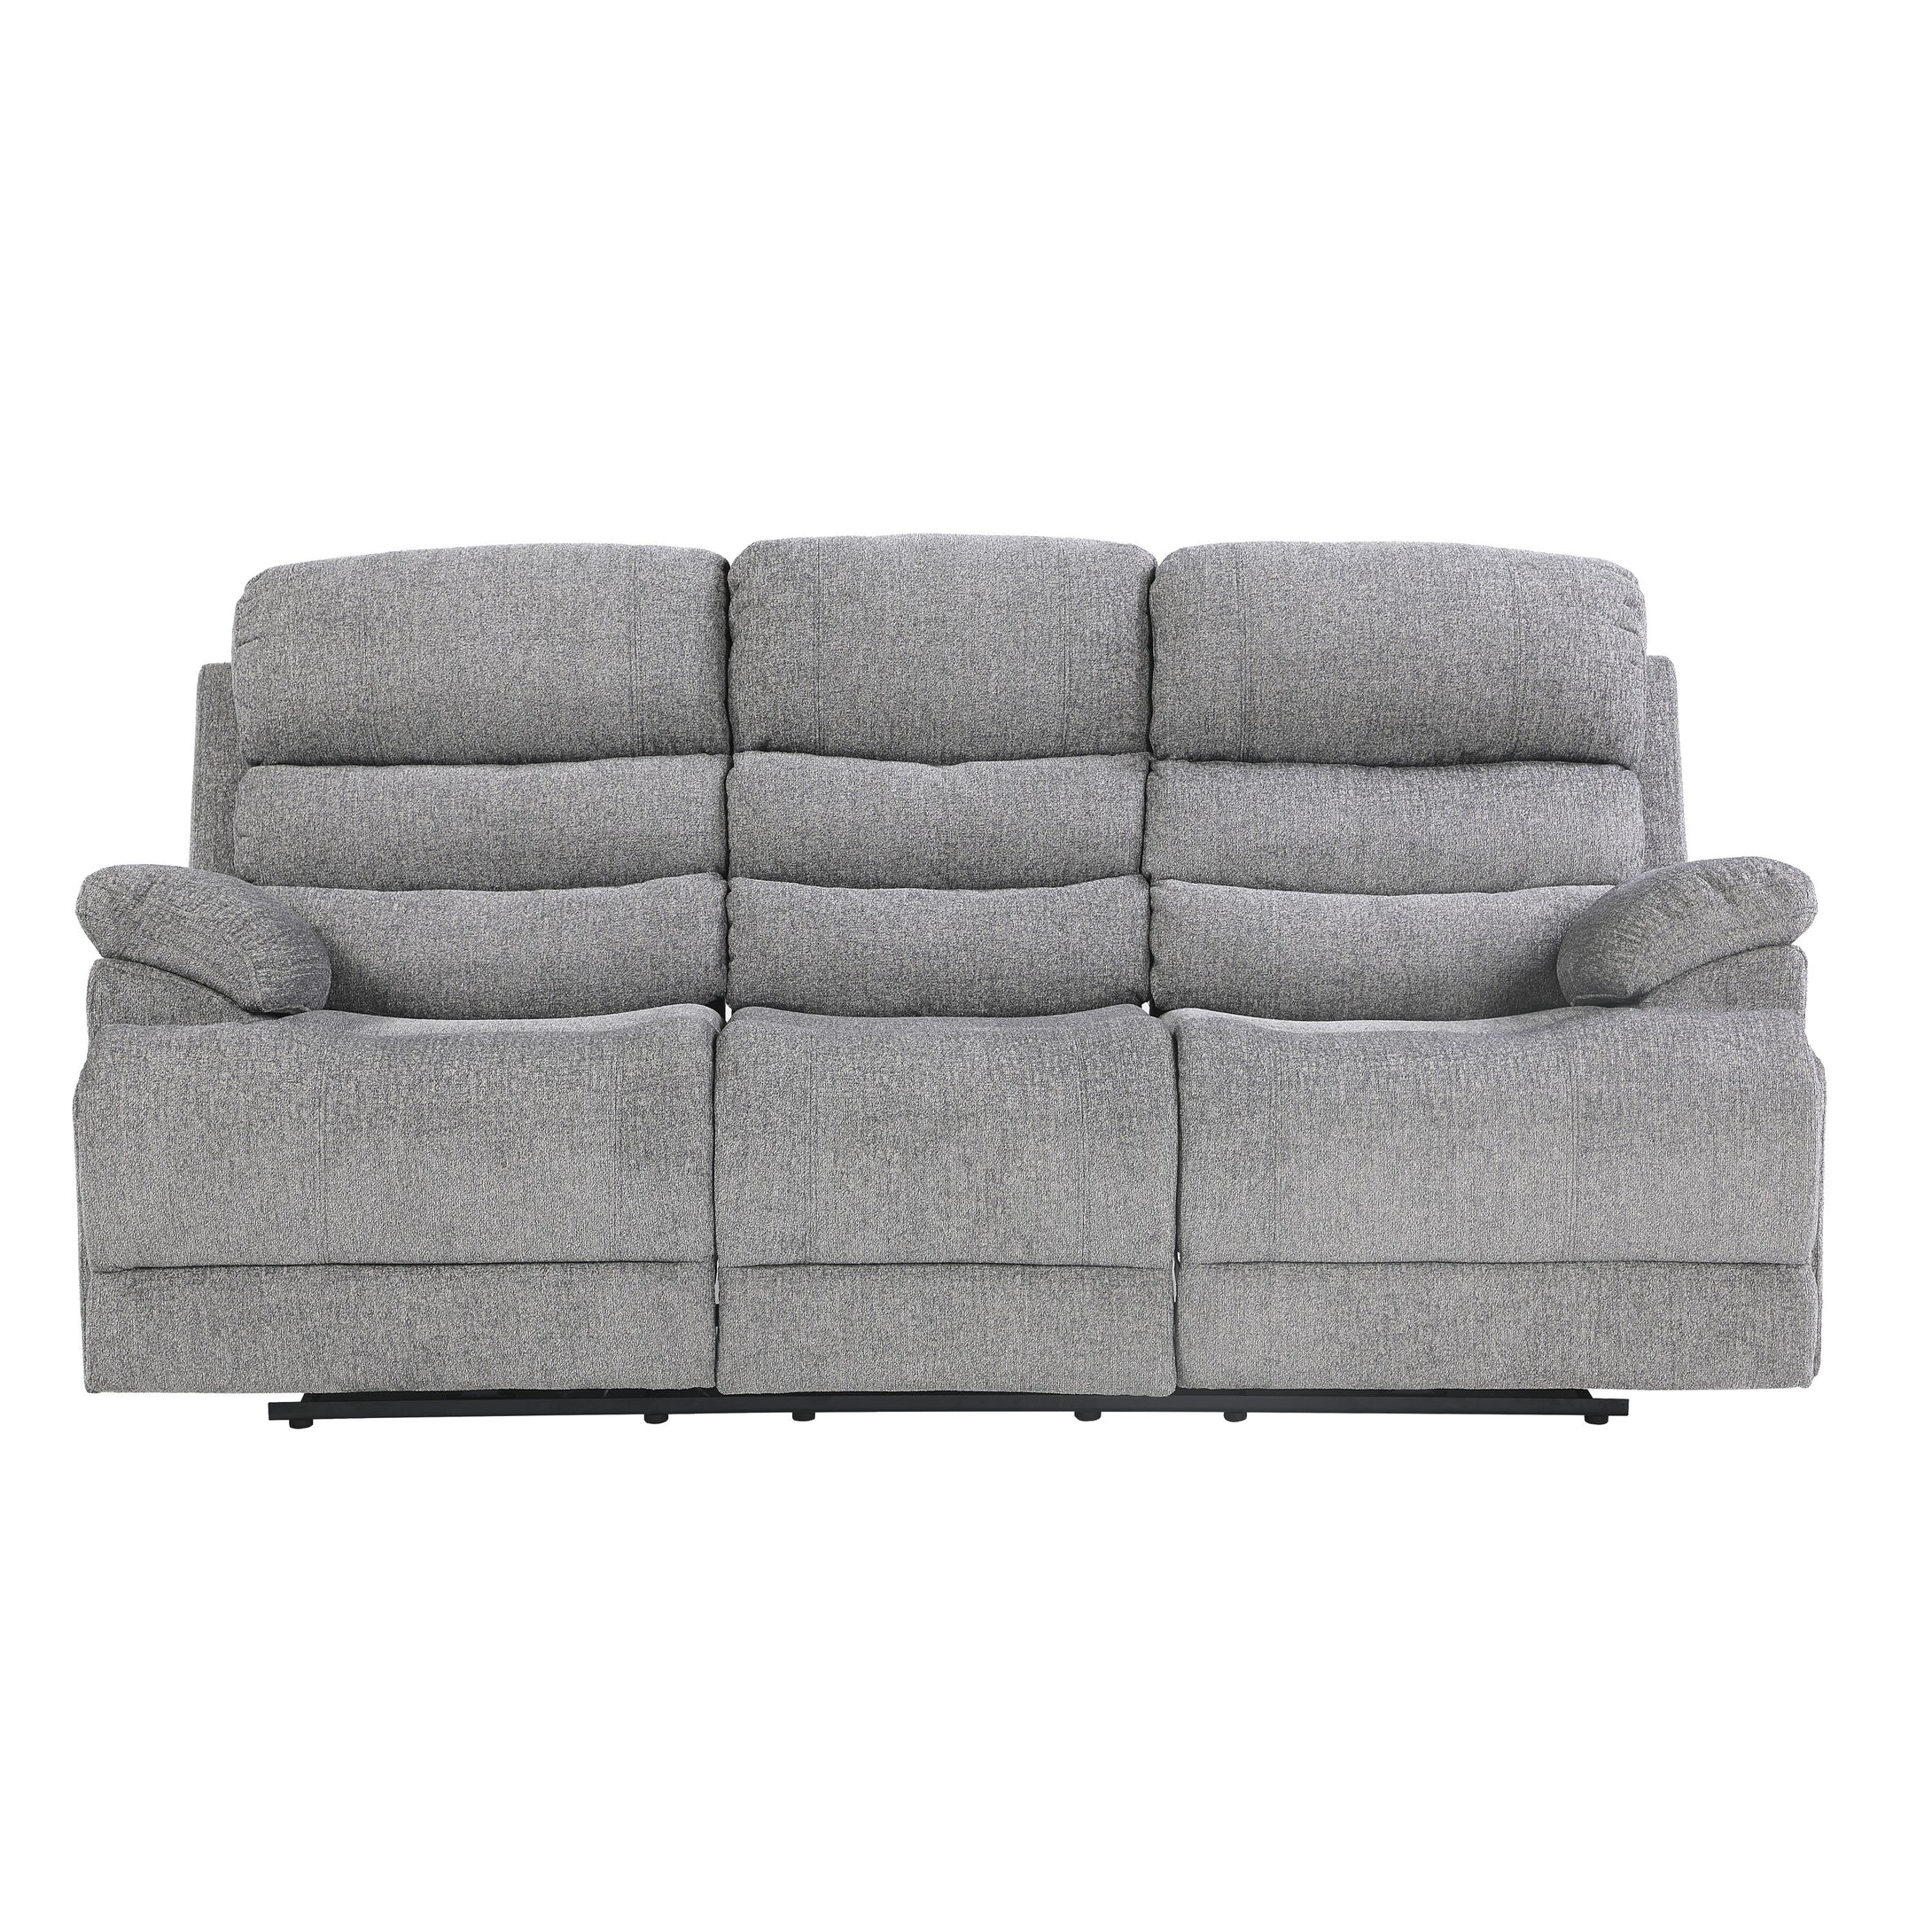 9422FS-3PWH Power Double Reclining Sofa with Power Headrests and USB Ports